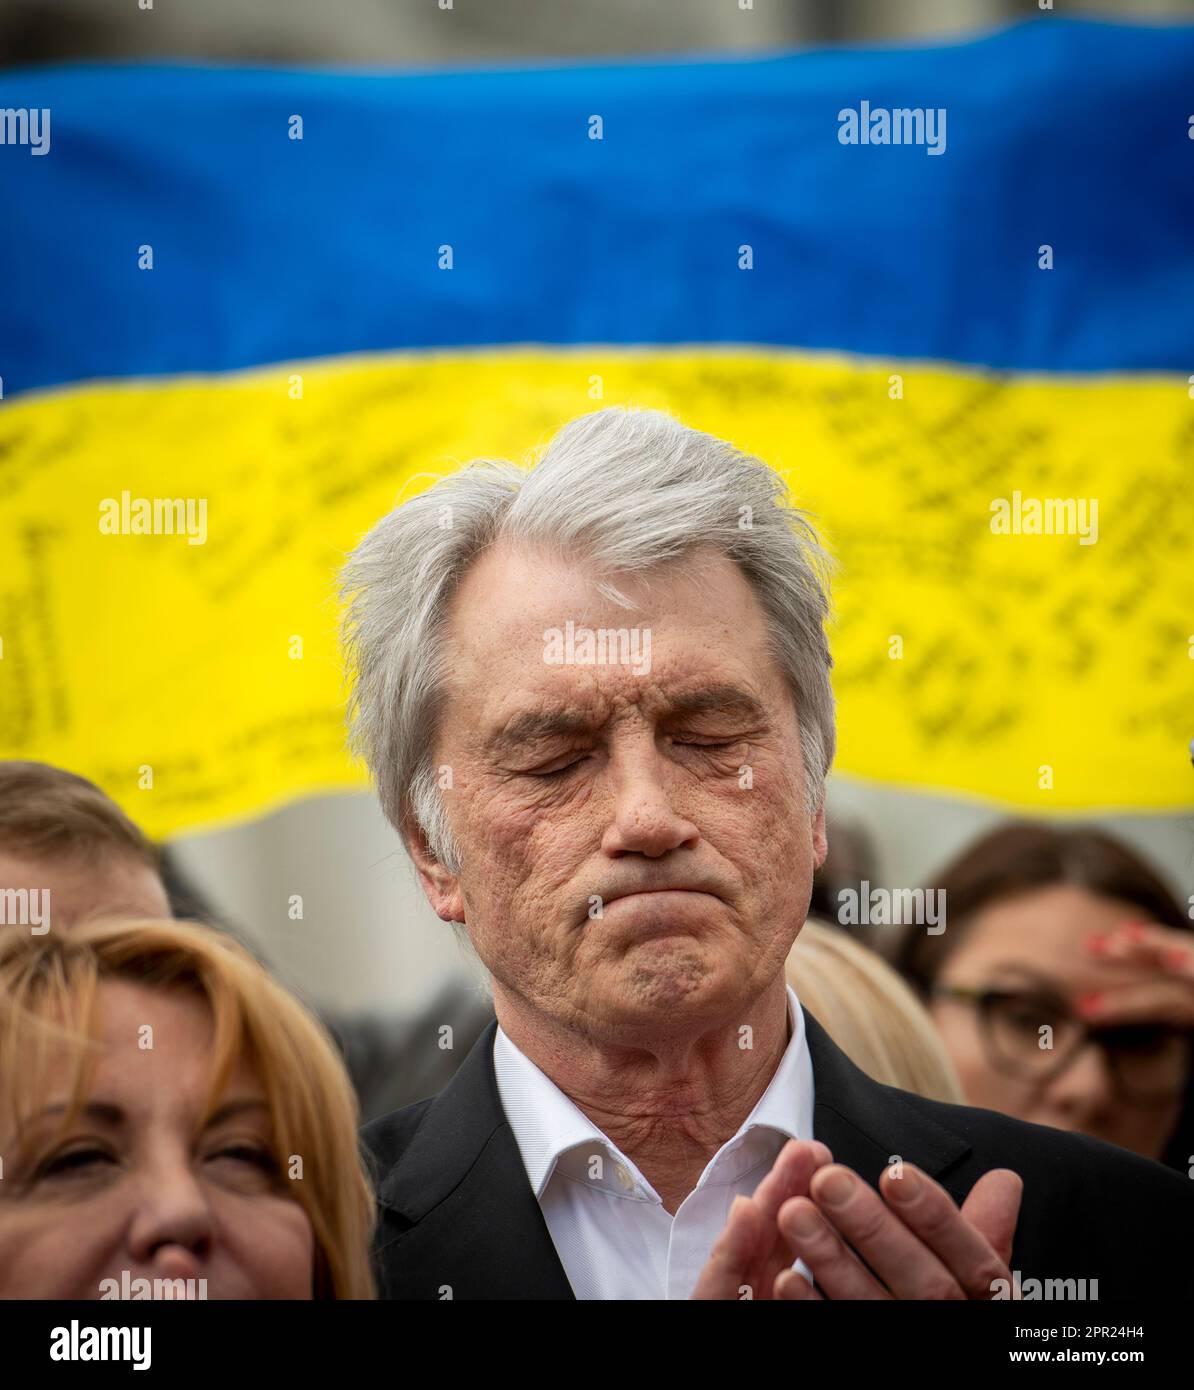 Washington, DC, April 25, 2023. Former Ukrainian President Viktor Yushchenko attends a press conference on the Ukrainian Victory Resolution at the US Capitol in Washington, DC, Tuesday, April 25, 2023. Credit: Rod Lamkey/CNP/MediaPunch Stock Photo